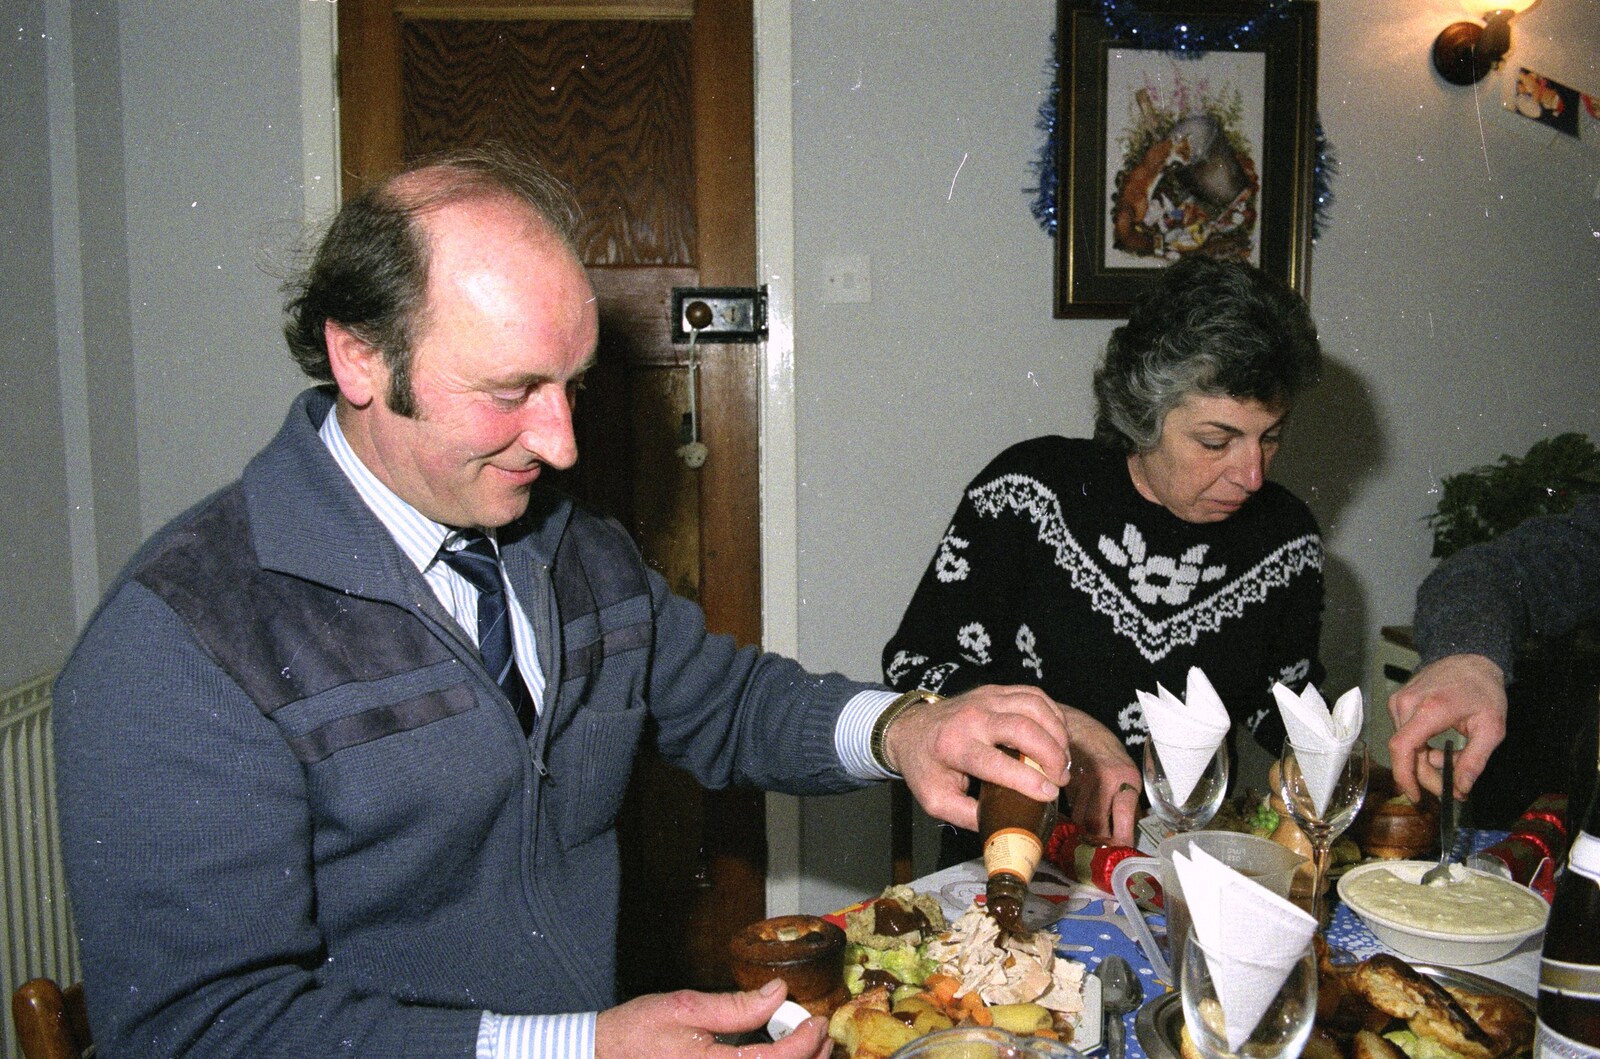 Applying sauce to Christmas dinner from Late Night, and Christmas with the Coxes, Needham, Norfolk - 25th December 1989